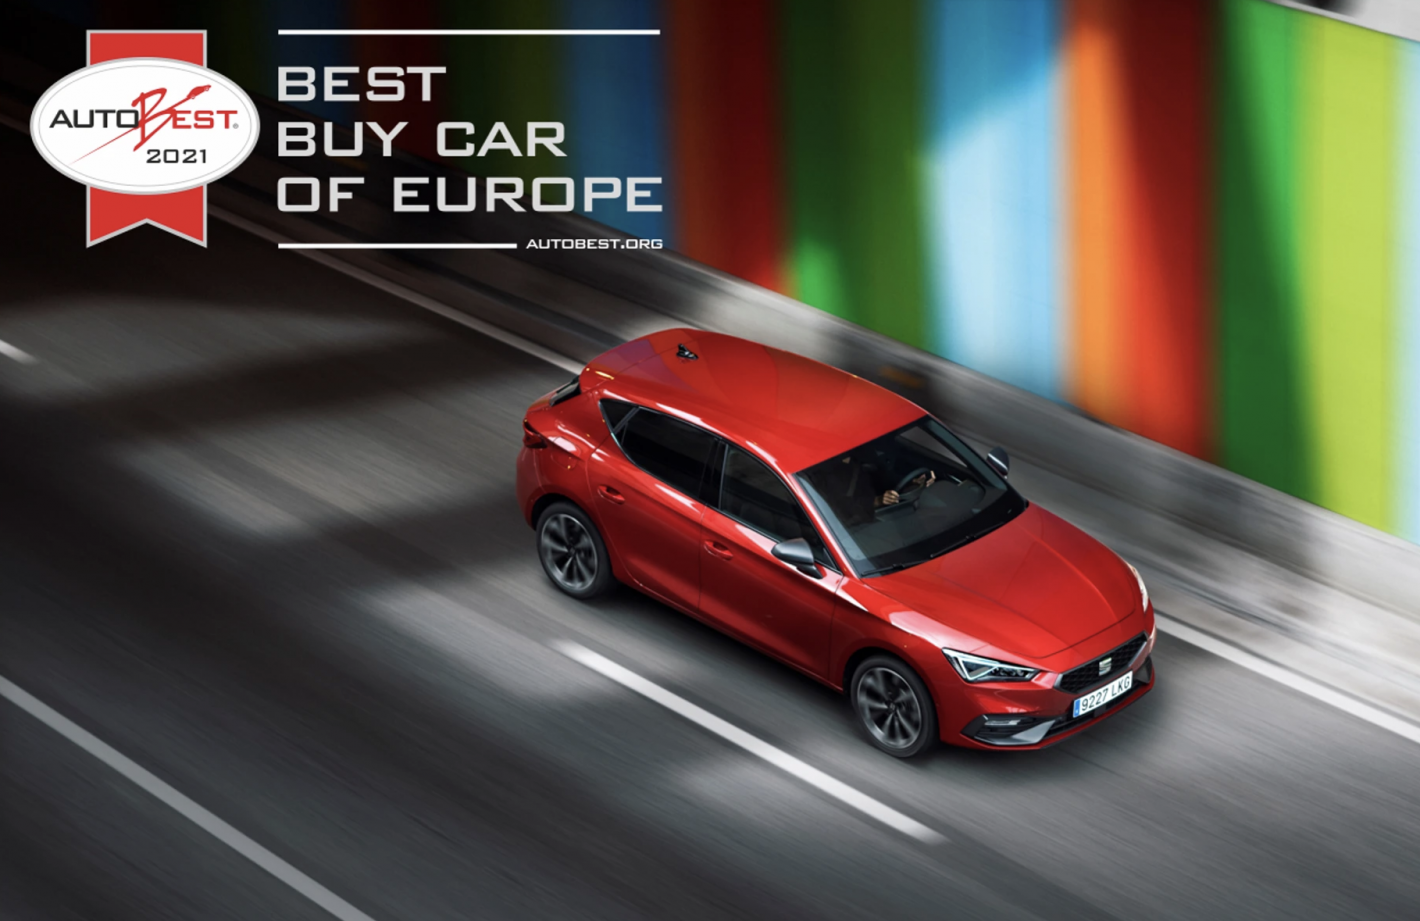 SEAT LEON best car of the year 2021